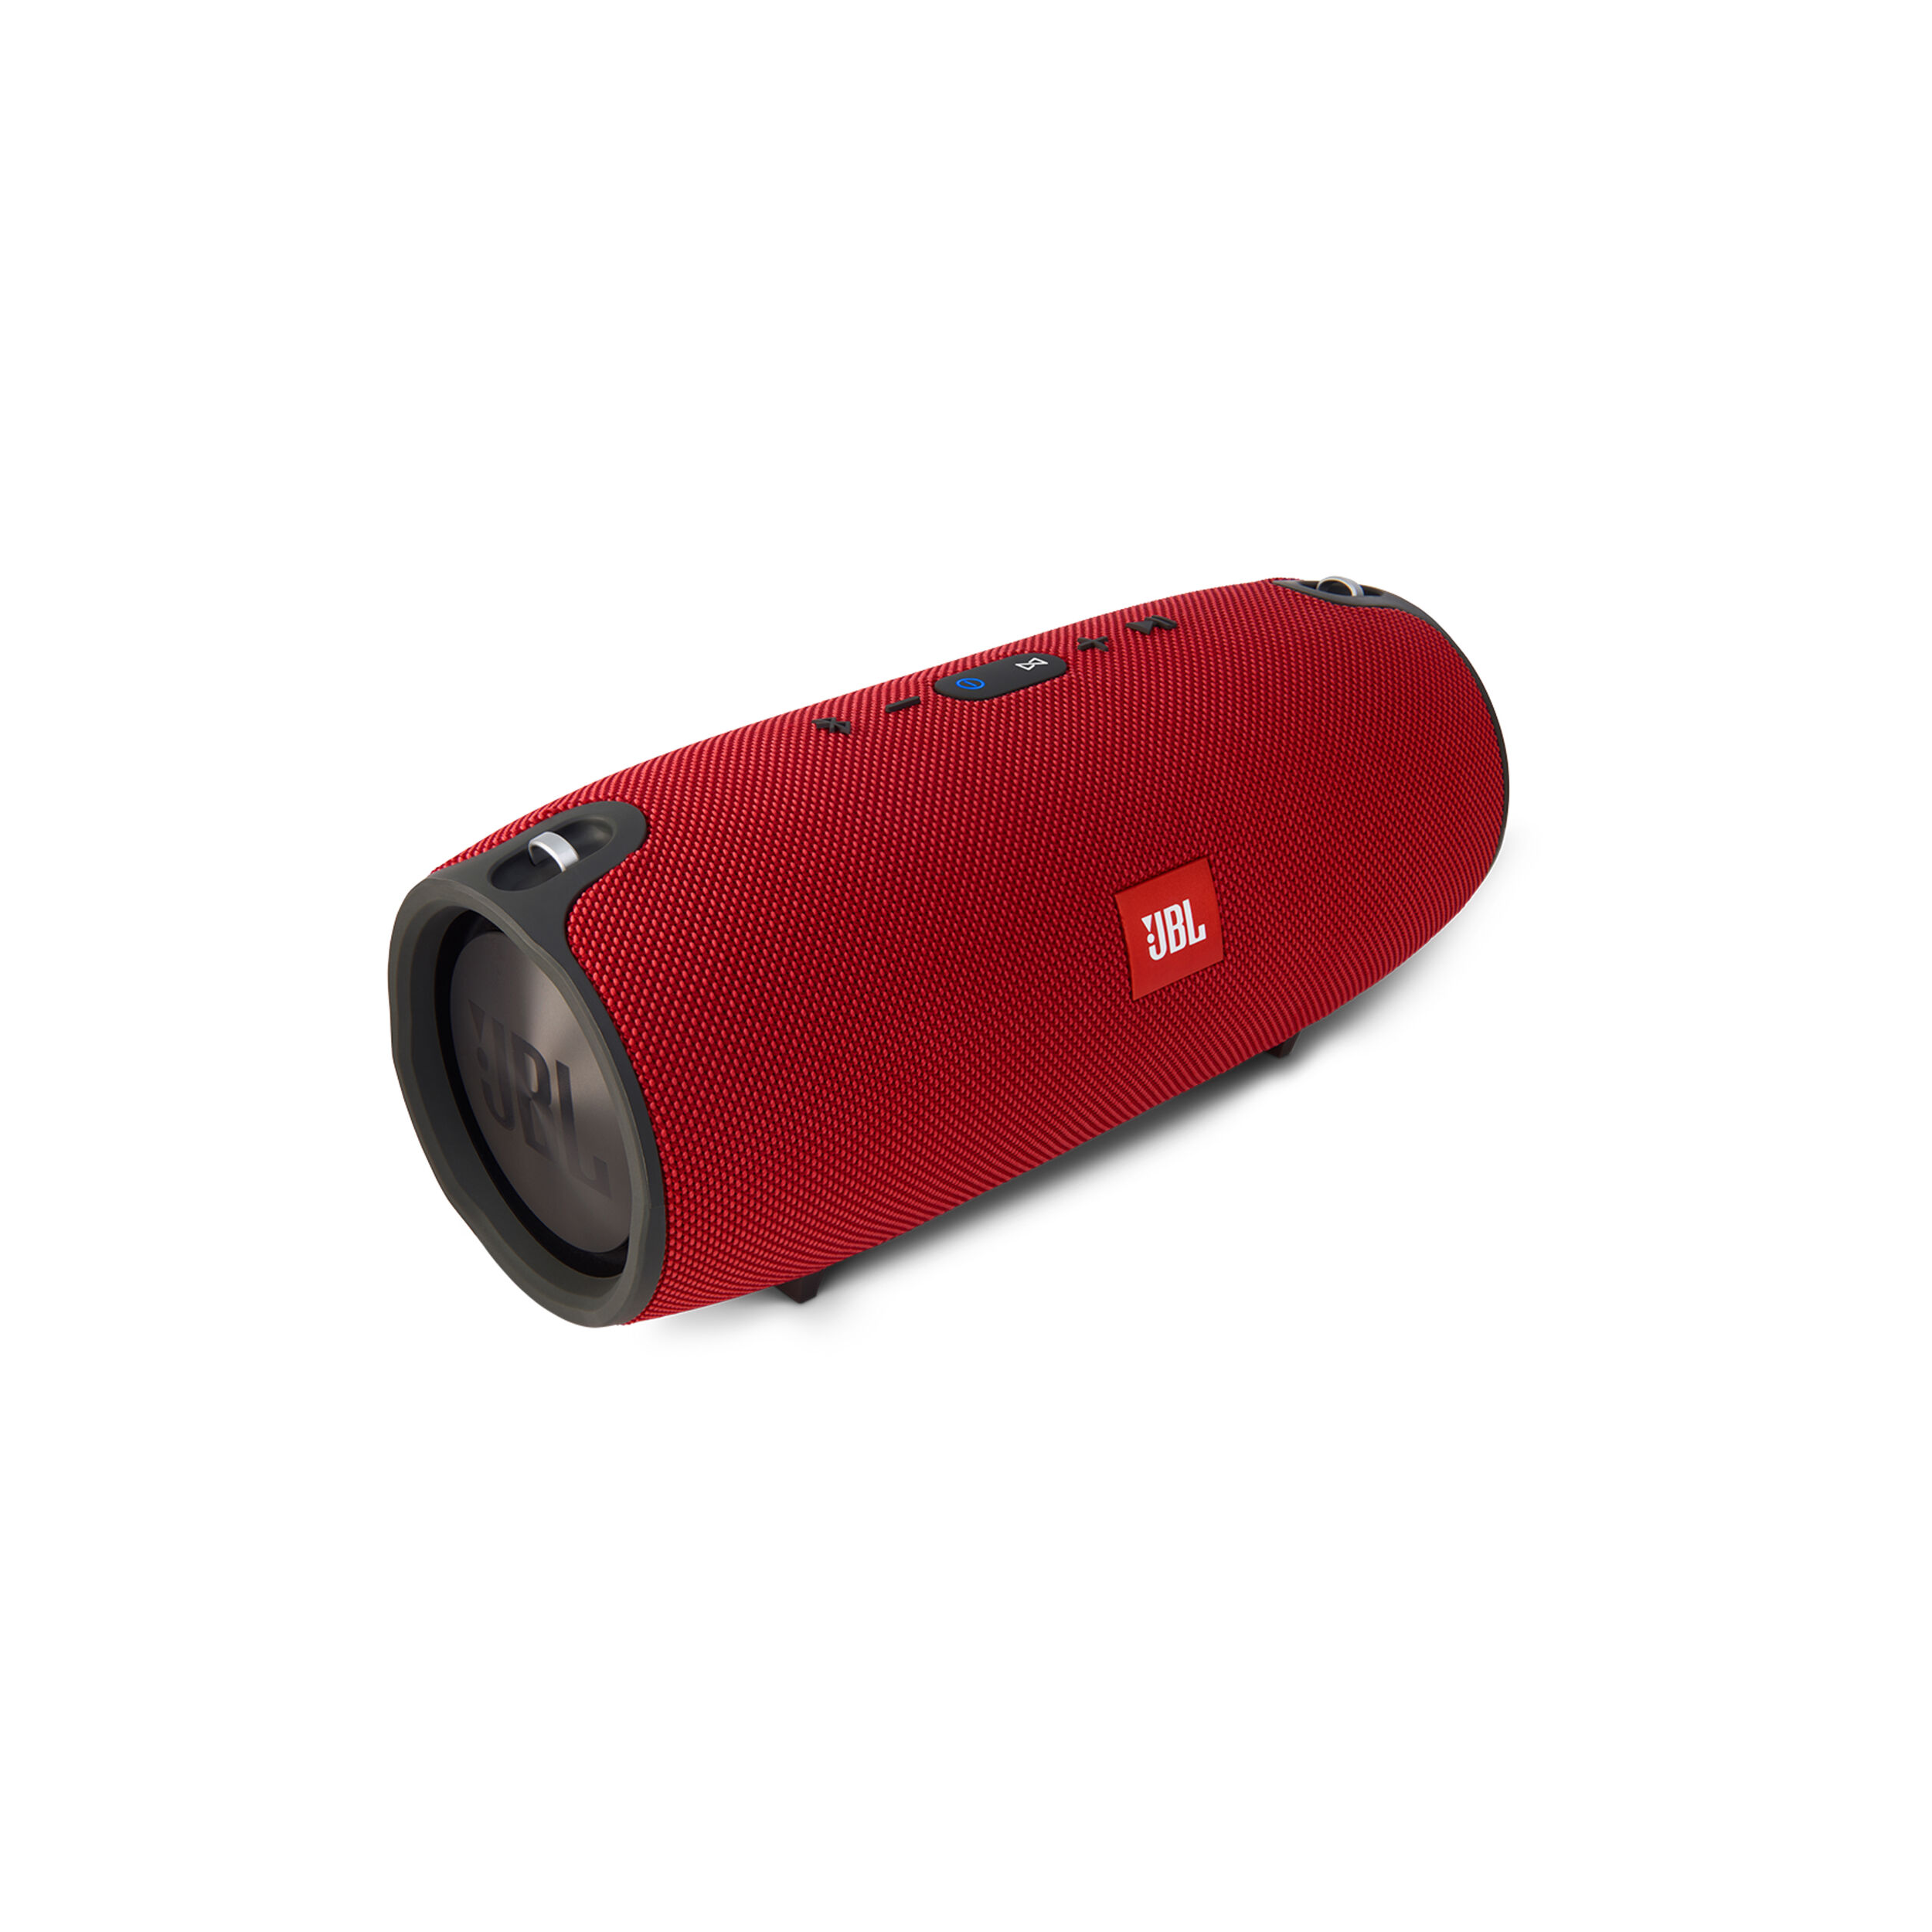 JBL Xtreme  JBL's ultimate splashproof portable speaker with  ultra-powerful performance and comprehensive features